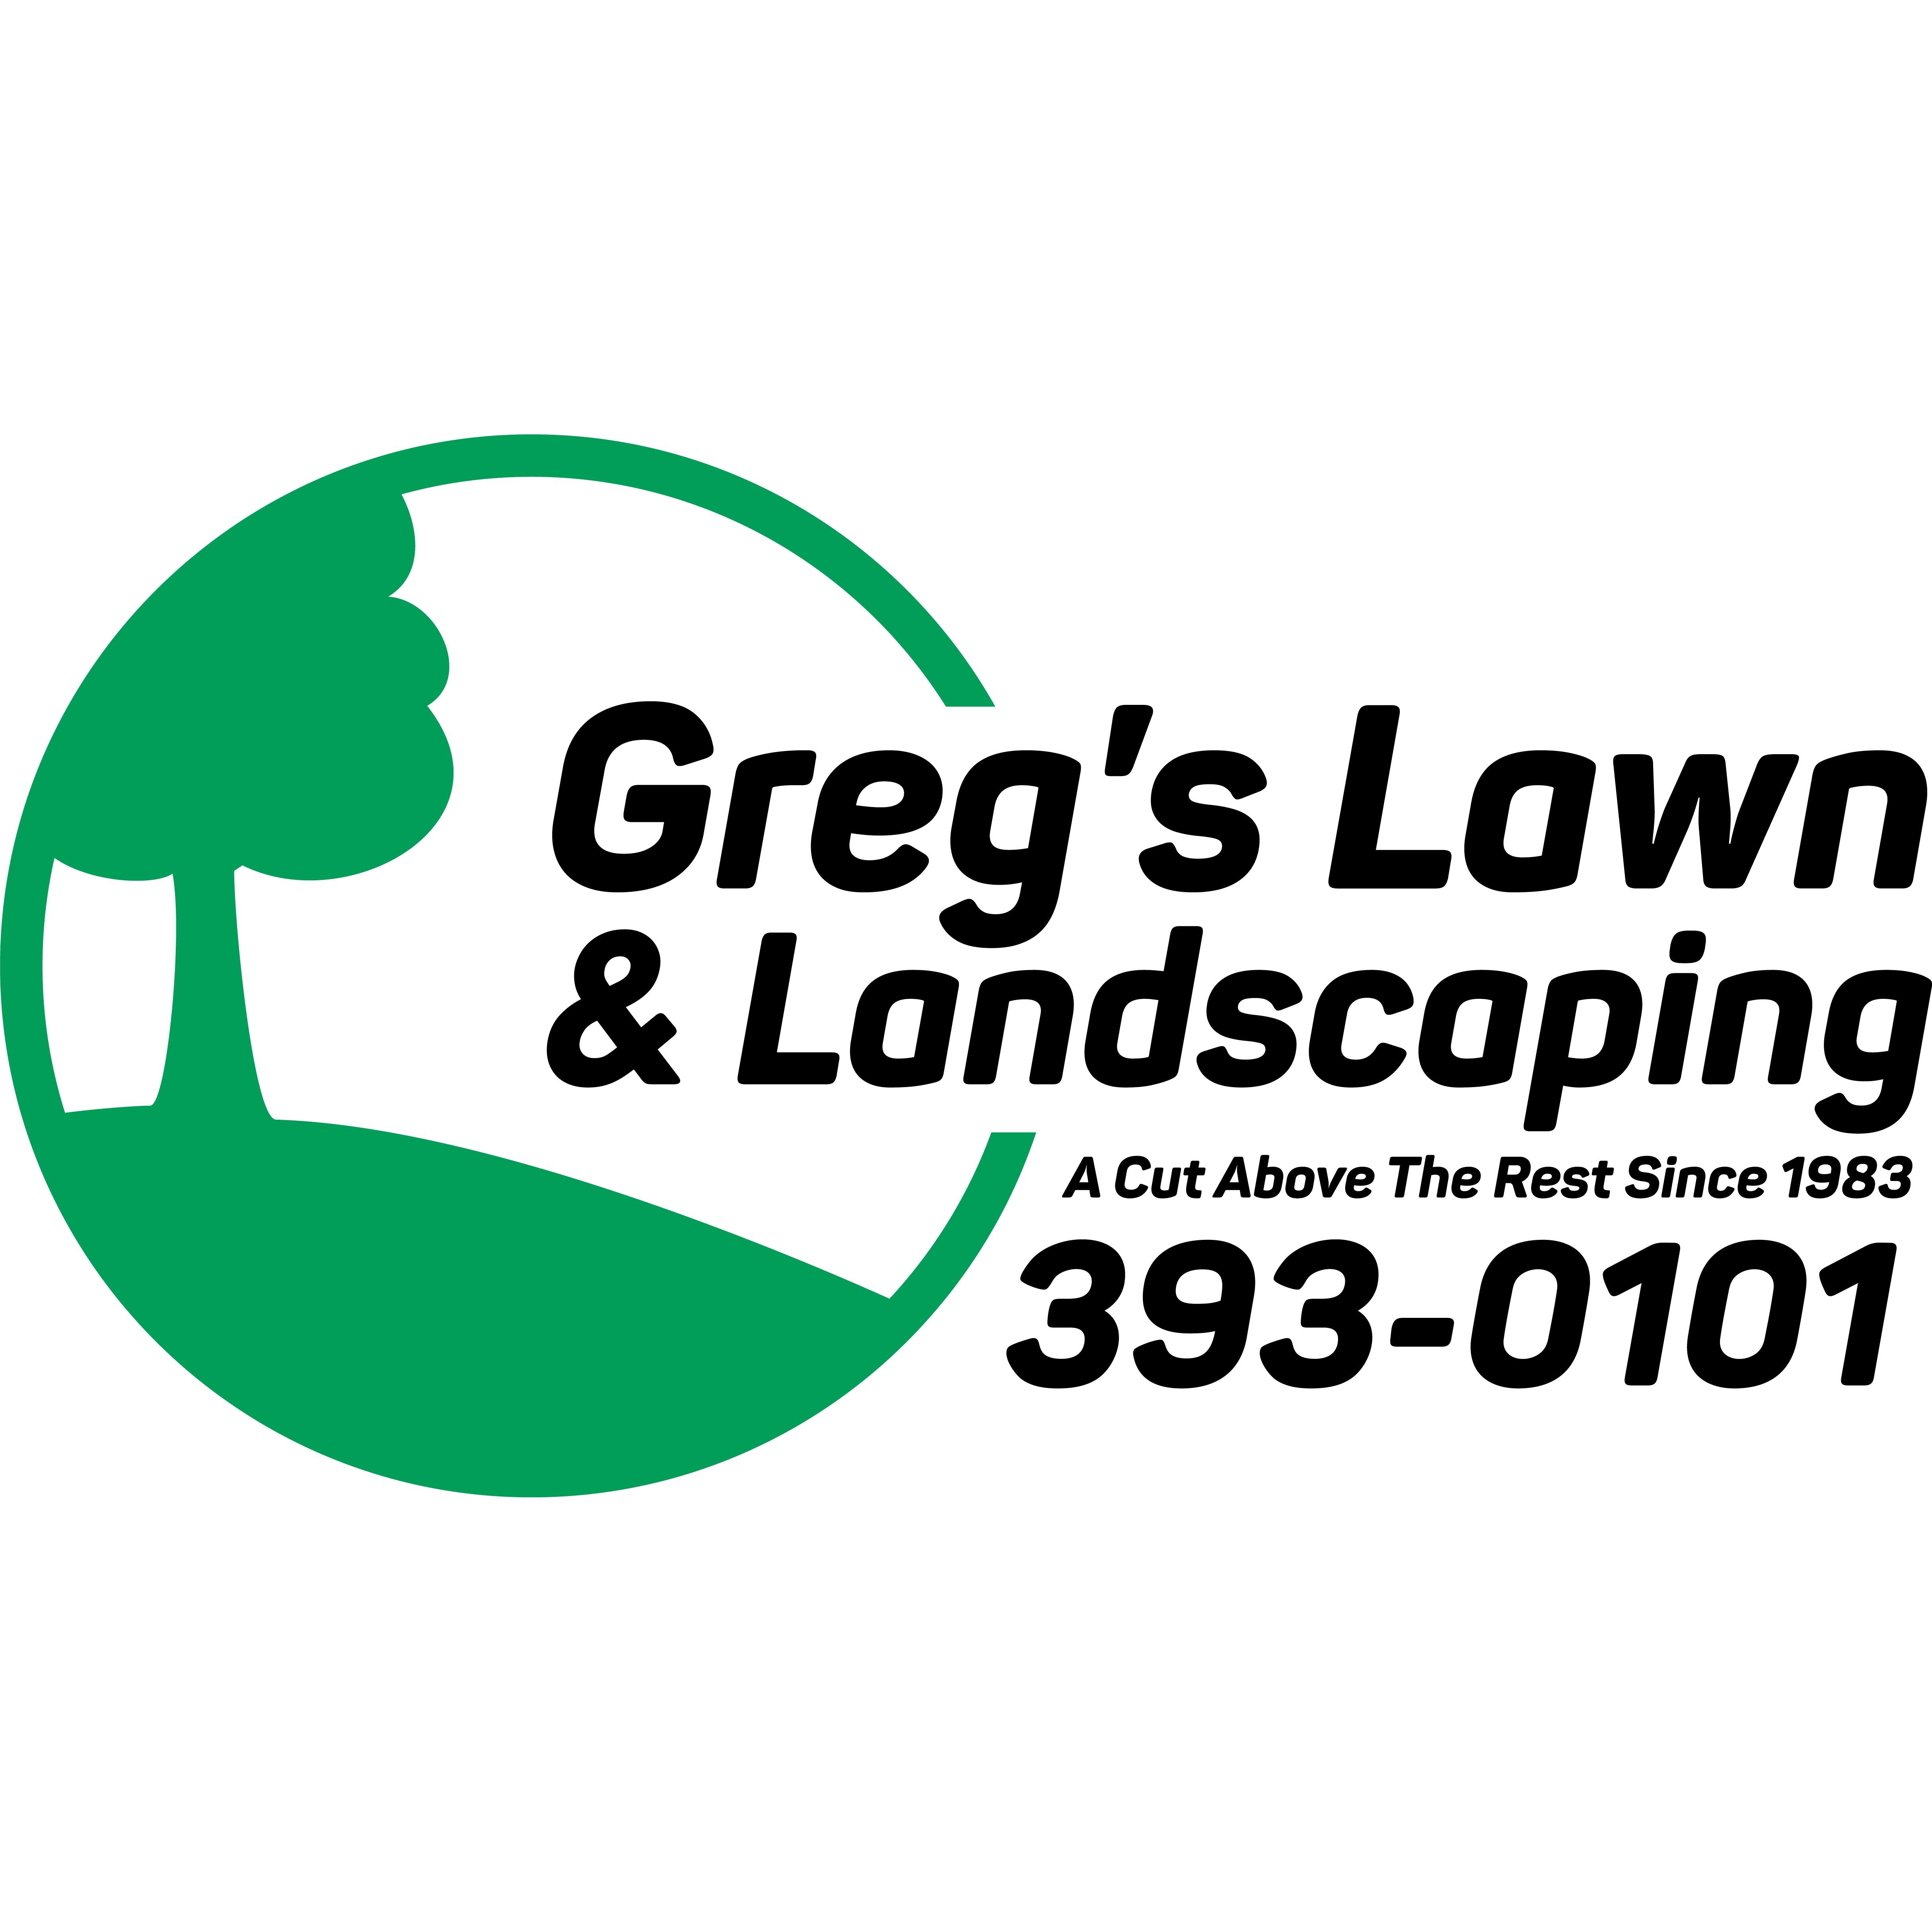 Greg's Lawn & Landscaping Photo